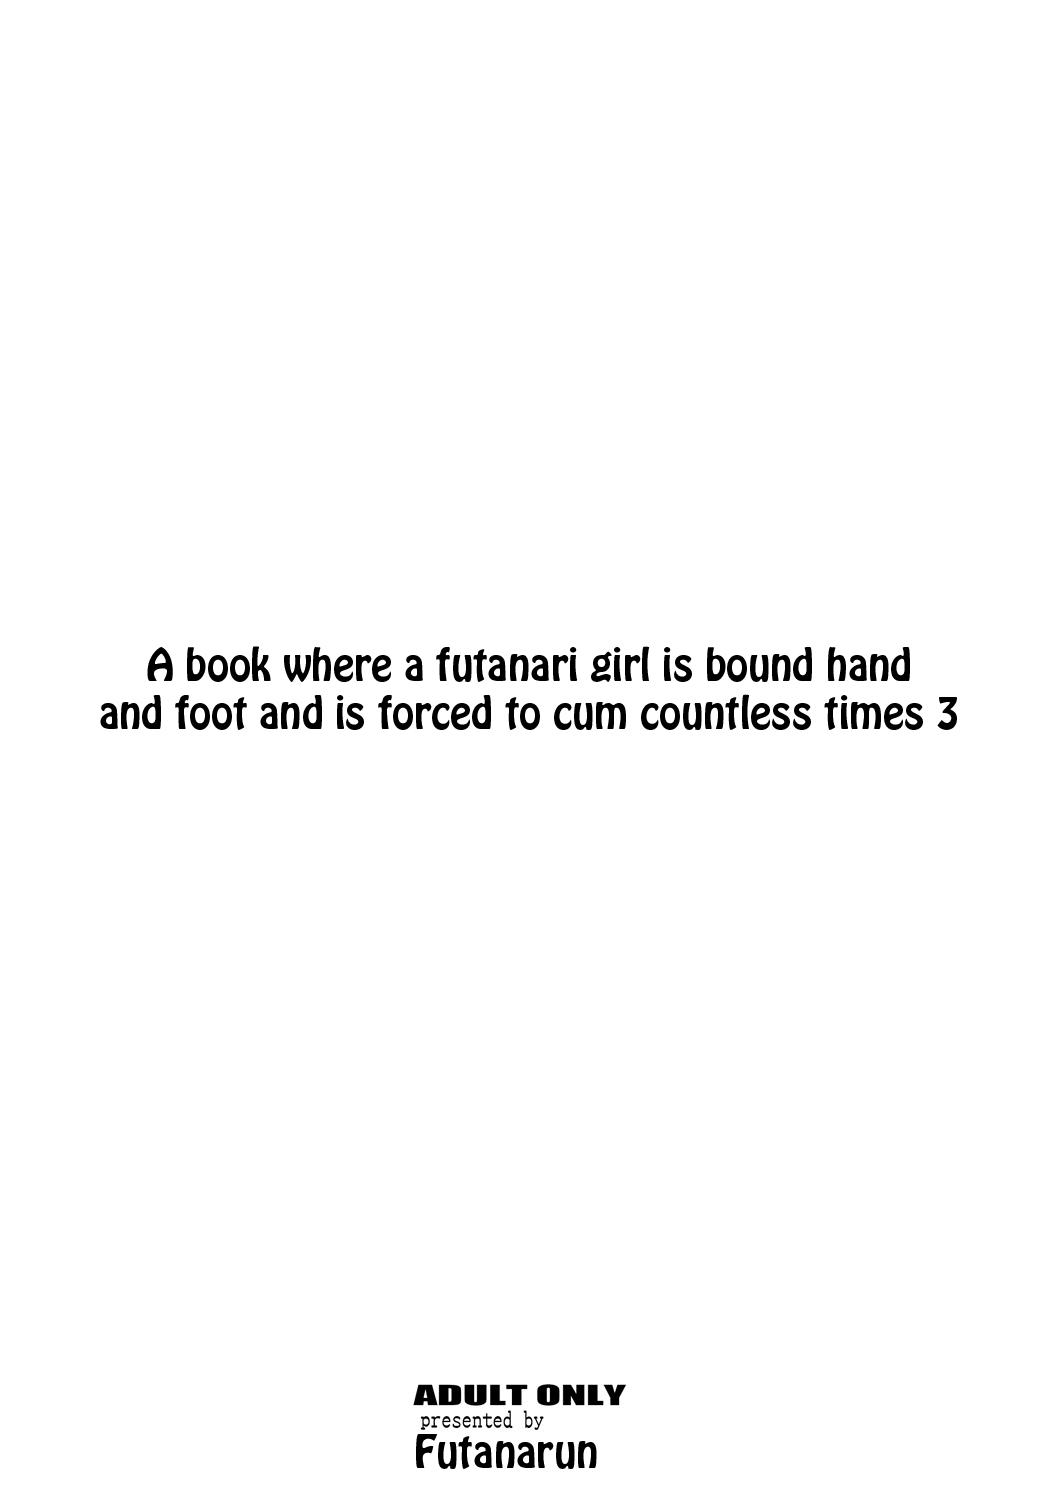 A Book where a Futanari Girl is Bound Hand and Foot and Forced to Cum Countless Times 3 25